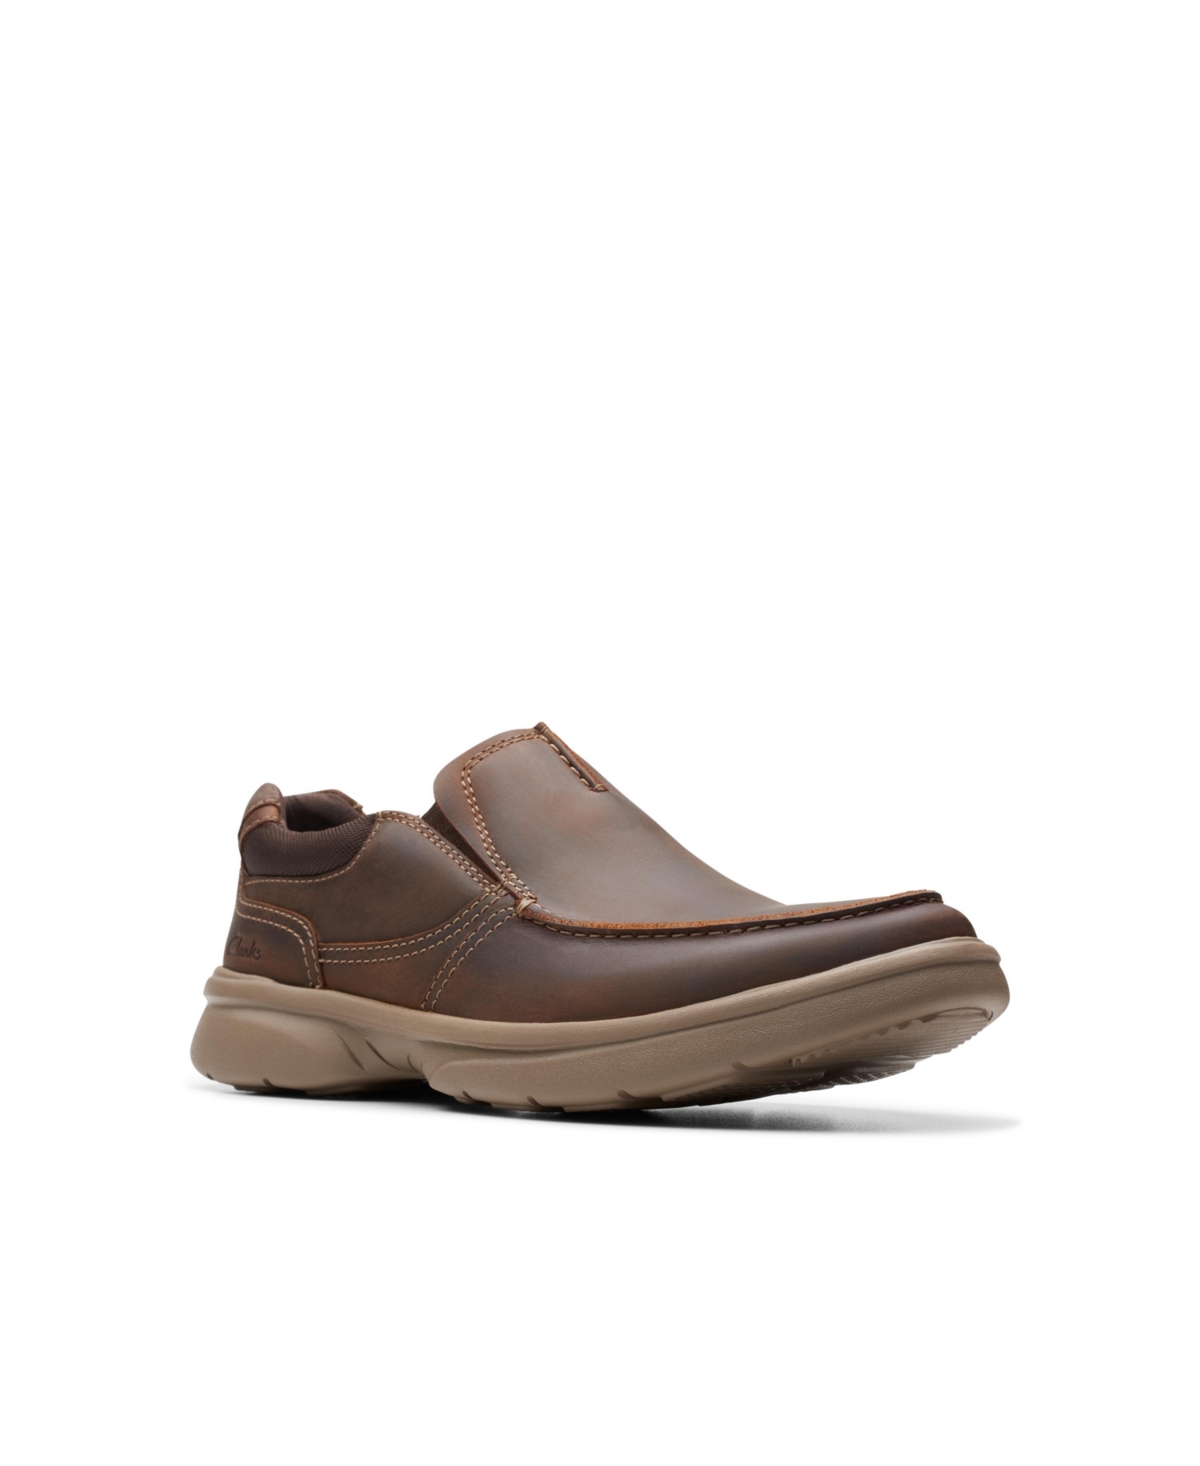 Men's Collection Bradley Free Slip On Shoes - Beeswax Leather